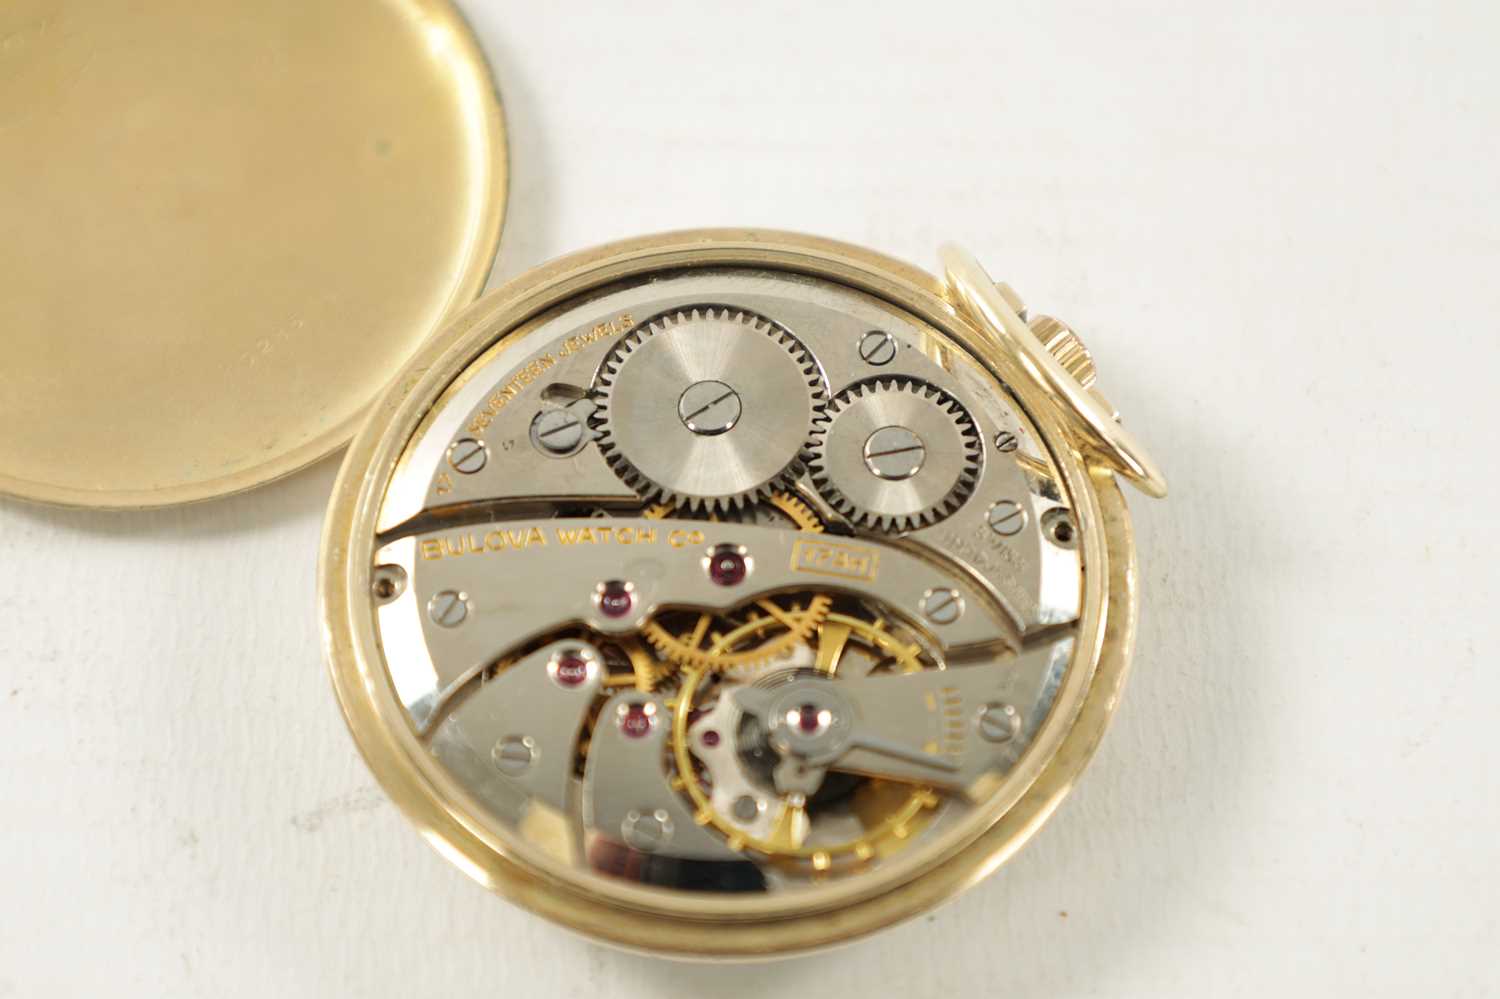 AN ART DECO 10CT ROLLED GOLD BULOVA POCKET WATCH - Image 3 of 4